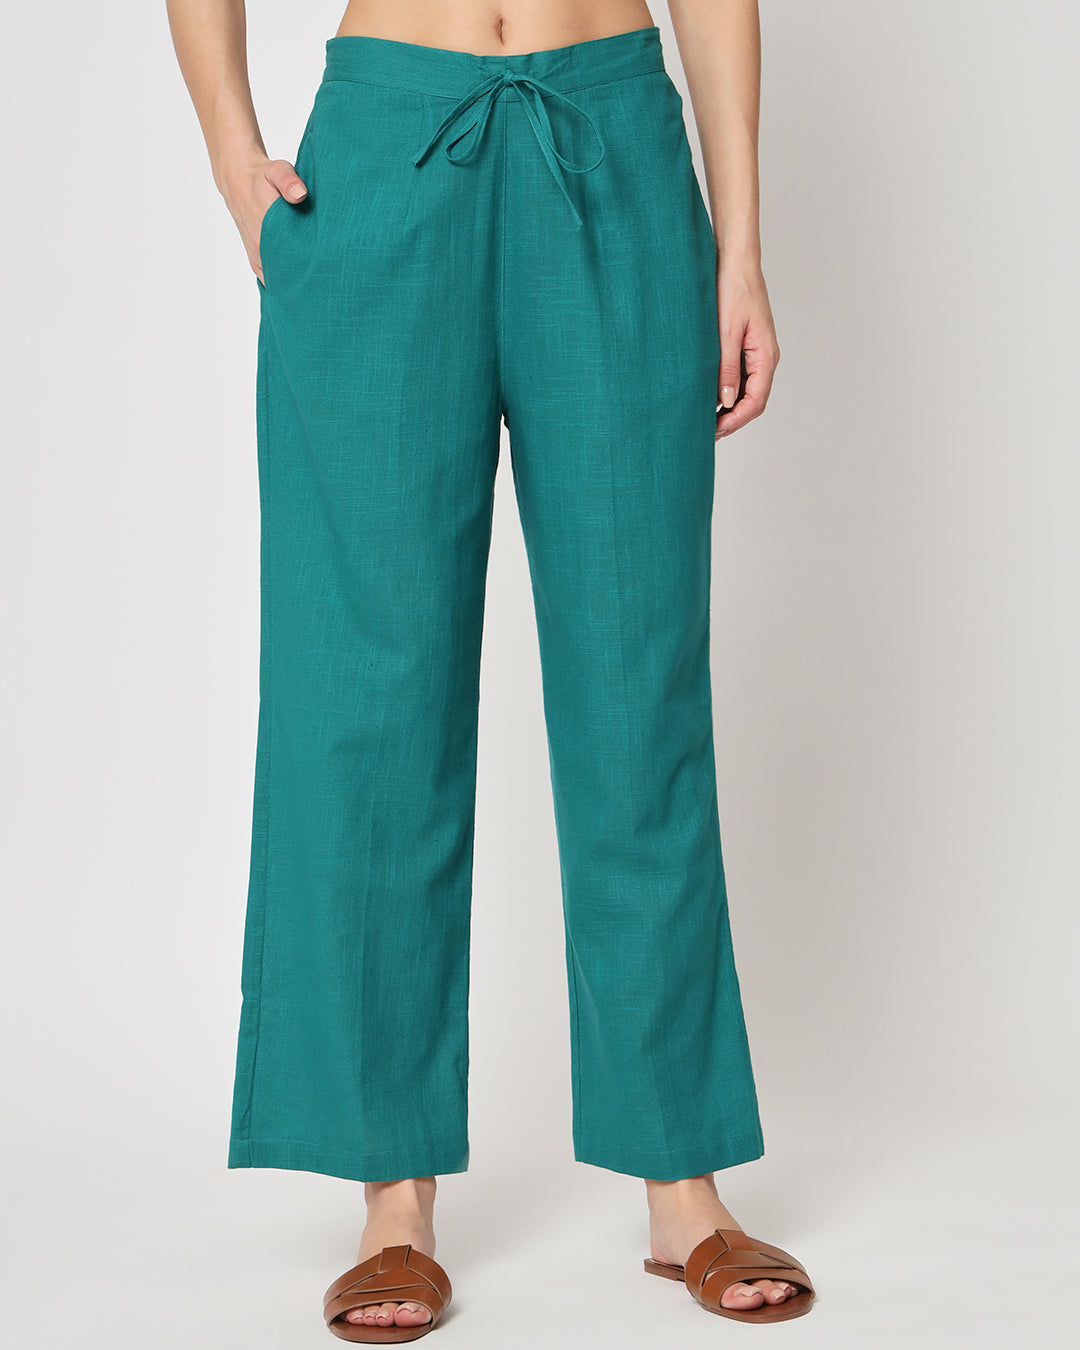 Combo: Wisteria Lane & Forest Green Straight Pants- Set of 2